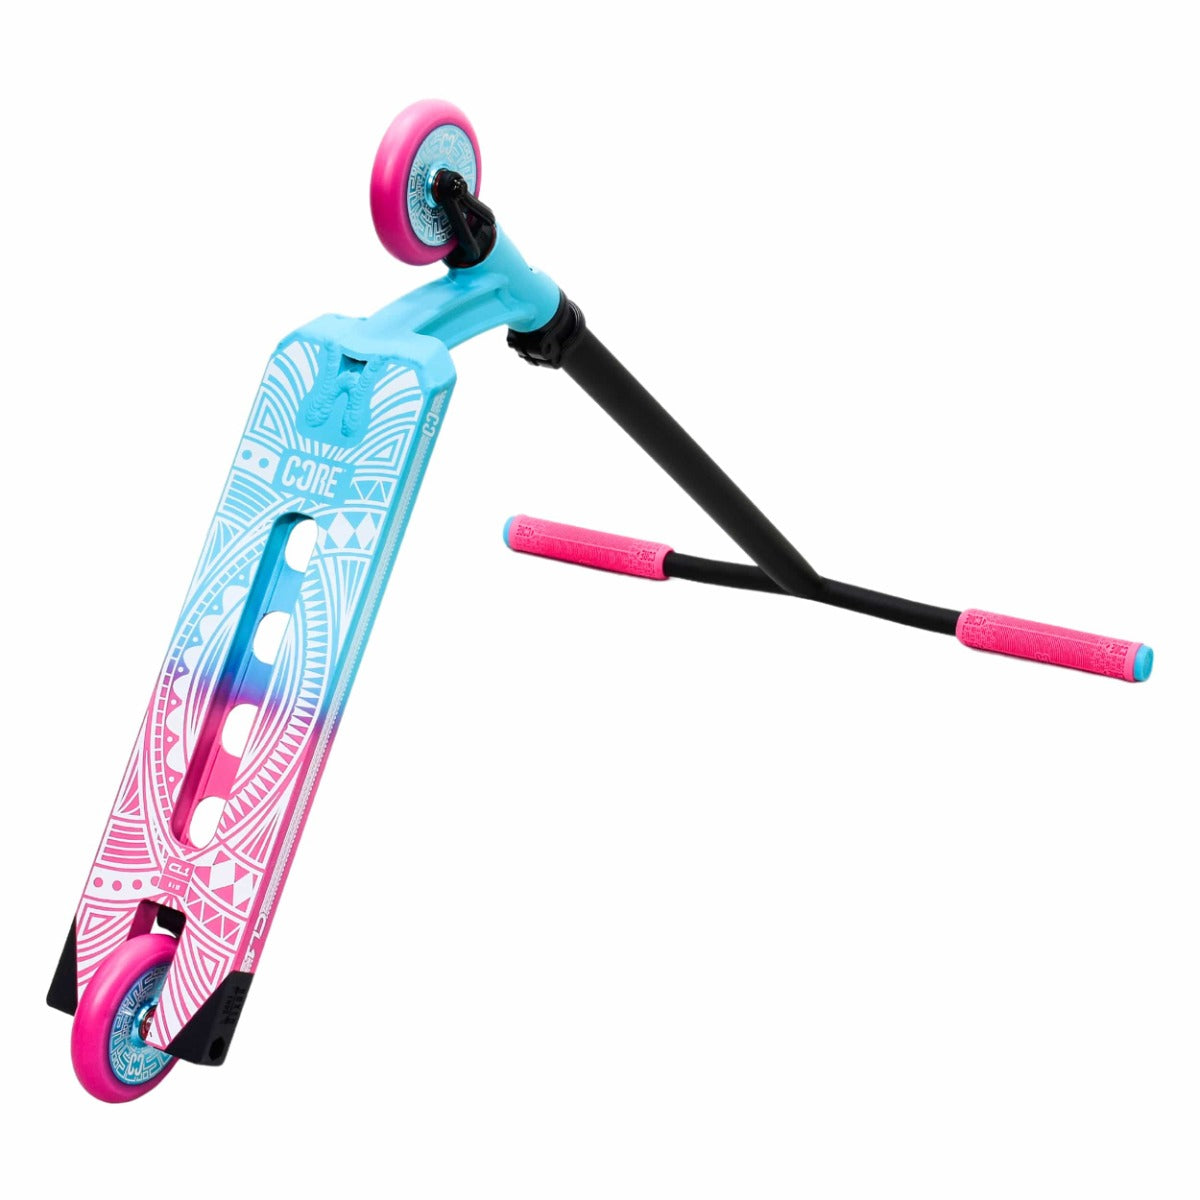 CORE CL1 Complete Stunt Scooter - Pink / Teal - Deck Angle